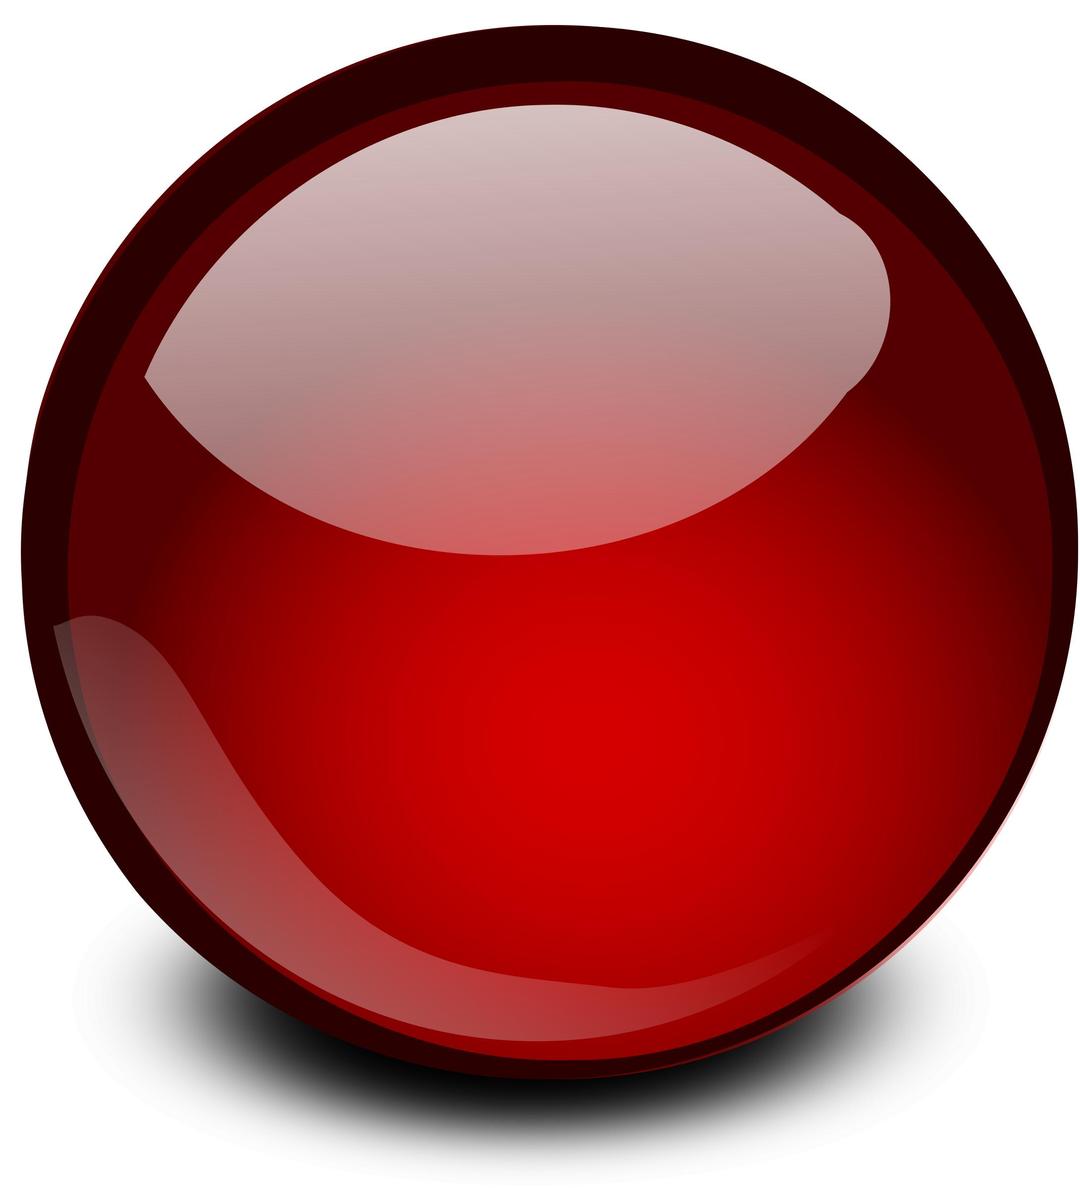 Red Glossy Orb png transparent